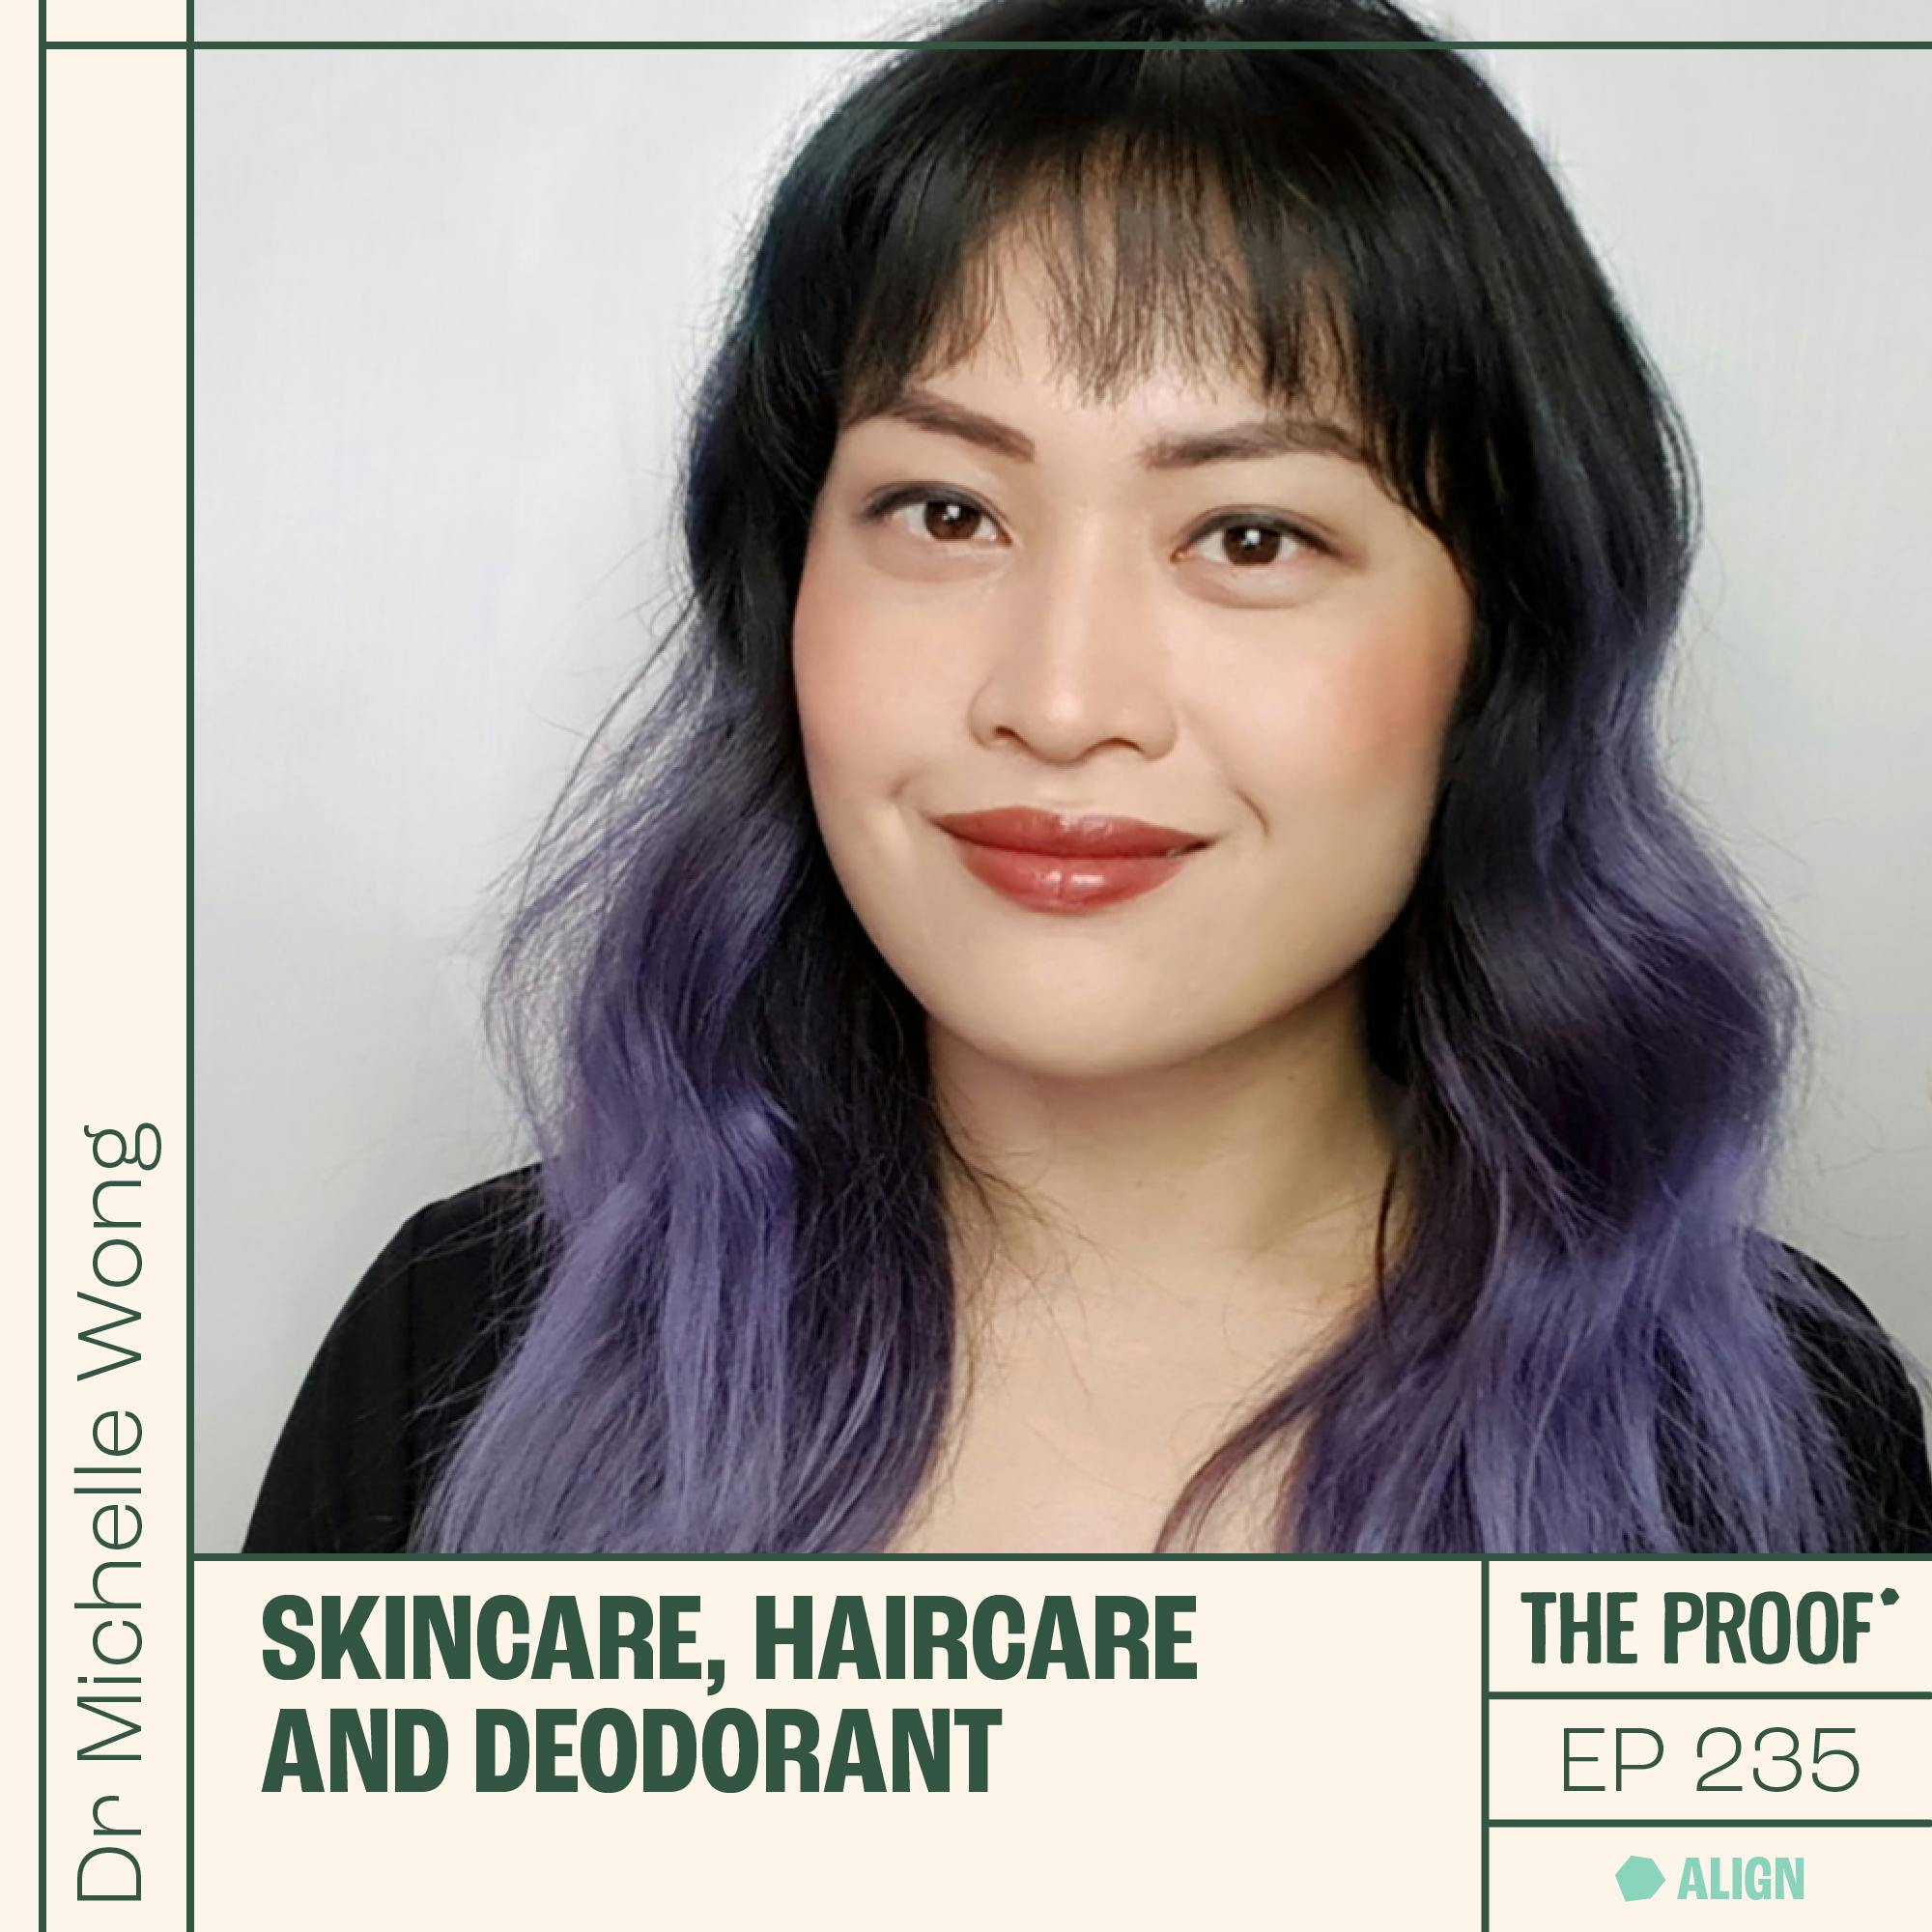 Skincare, haircare and deodorant | Michelle Wong, PhD